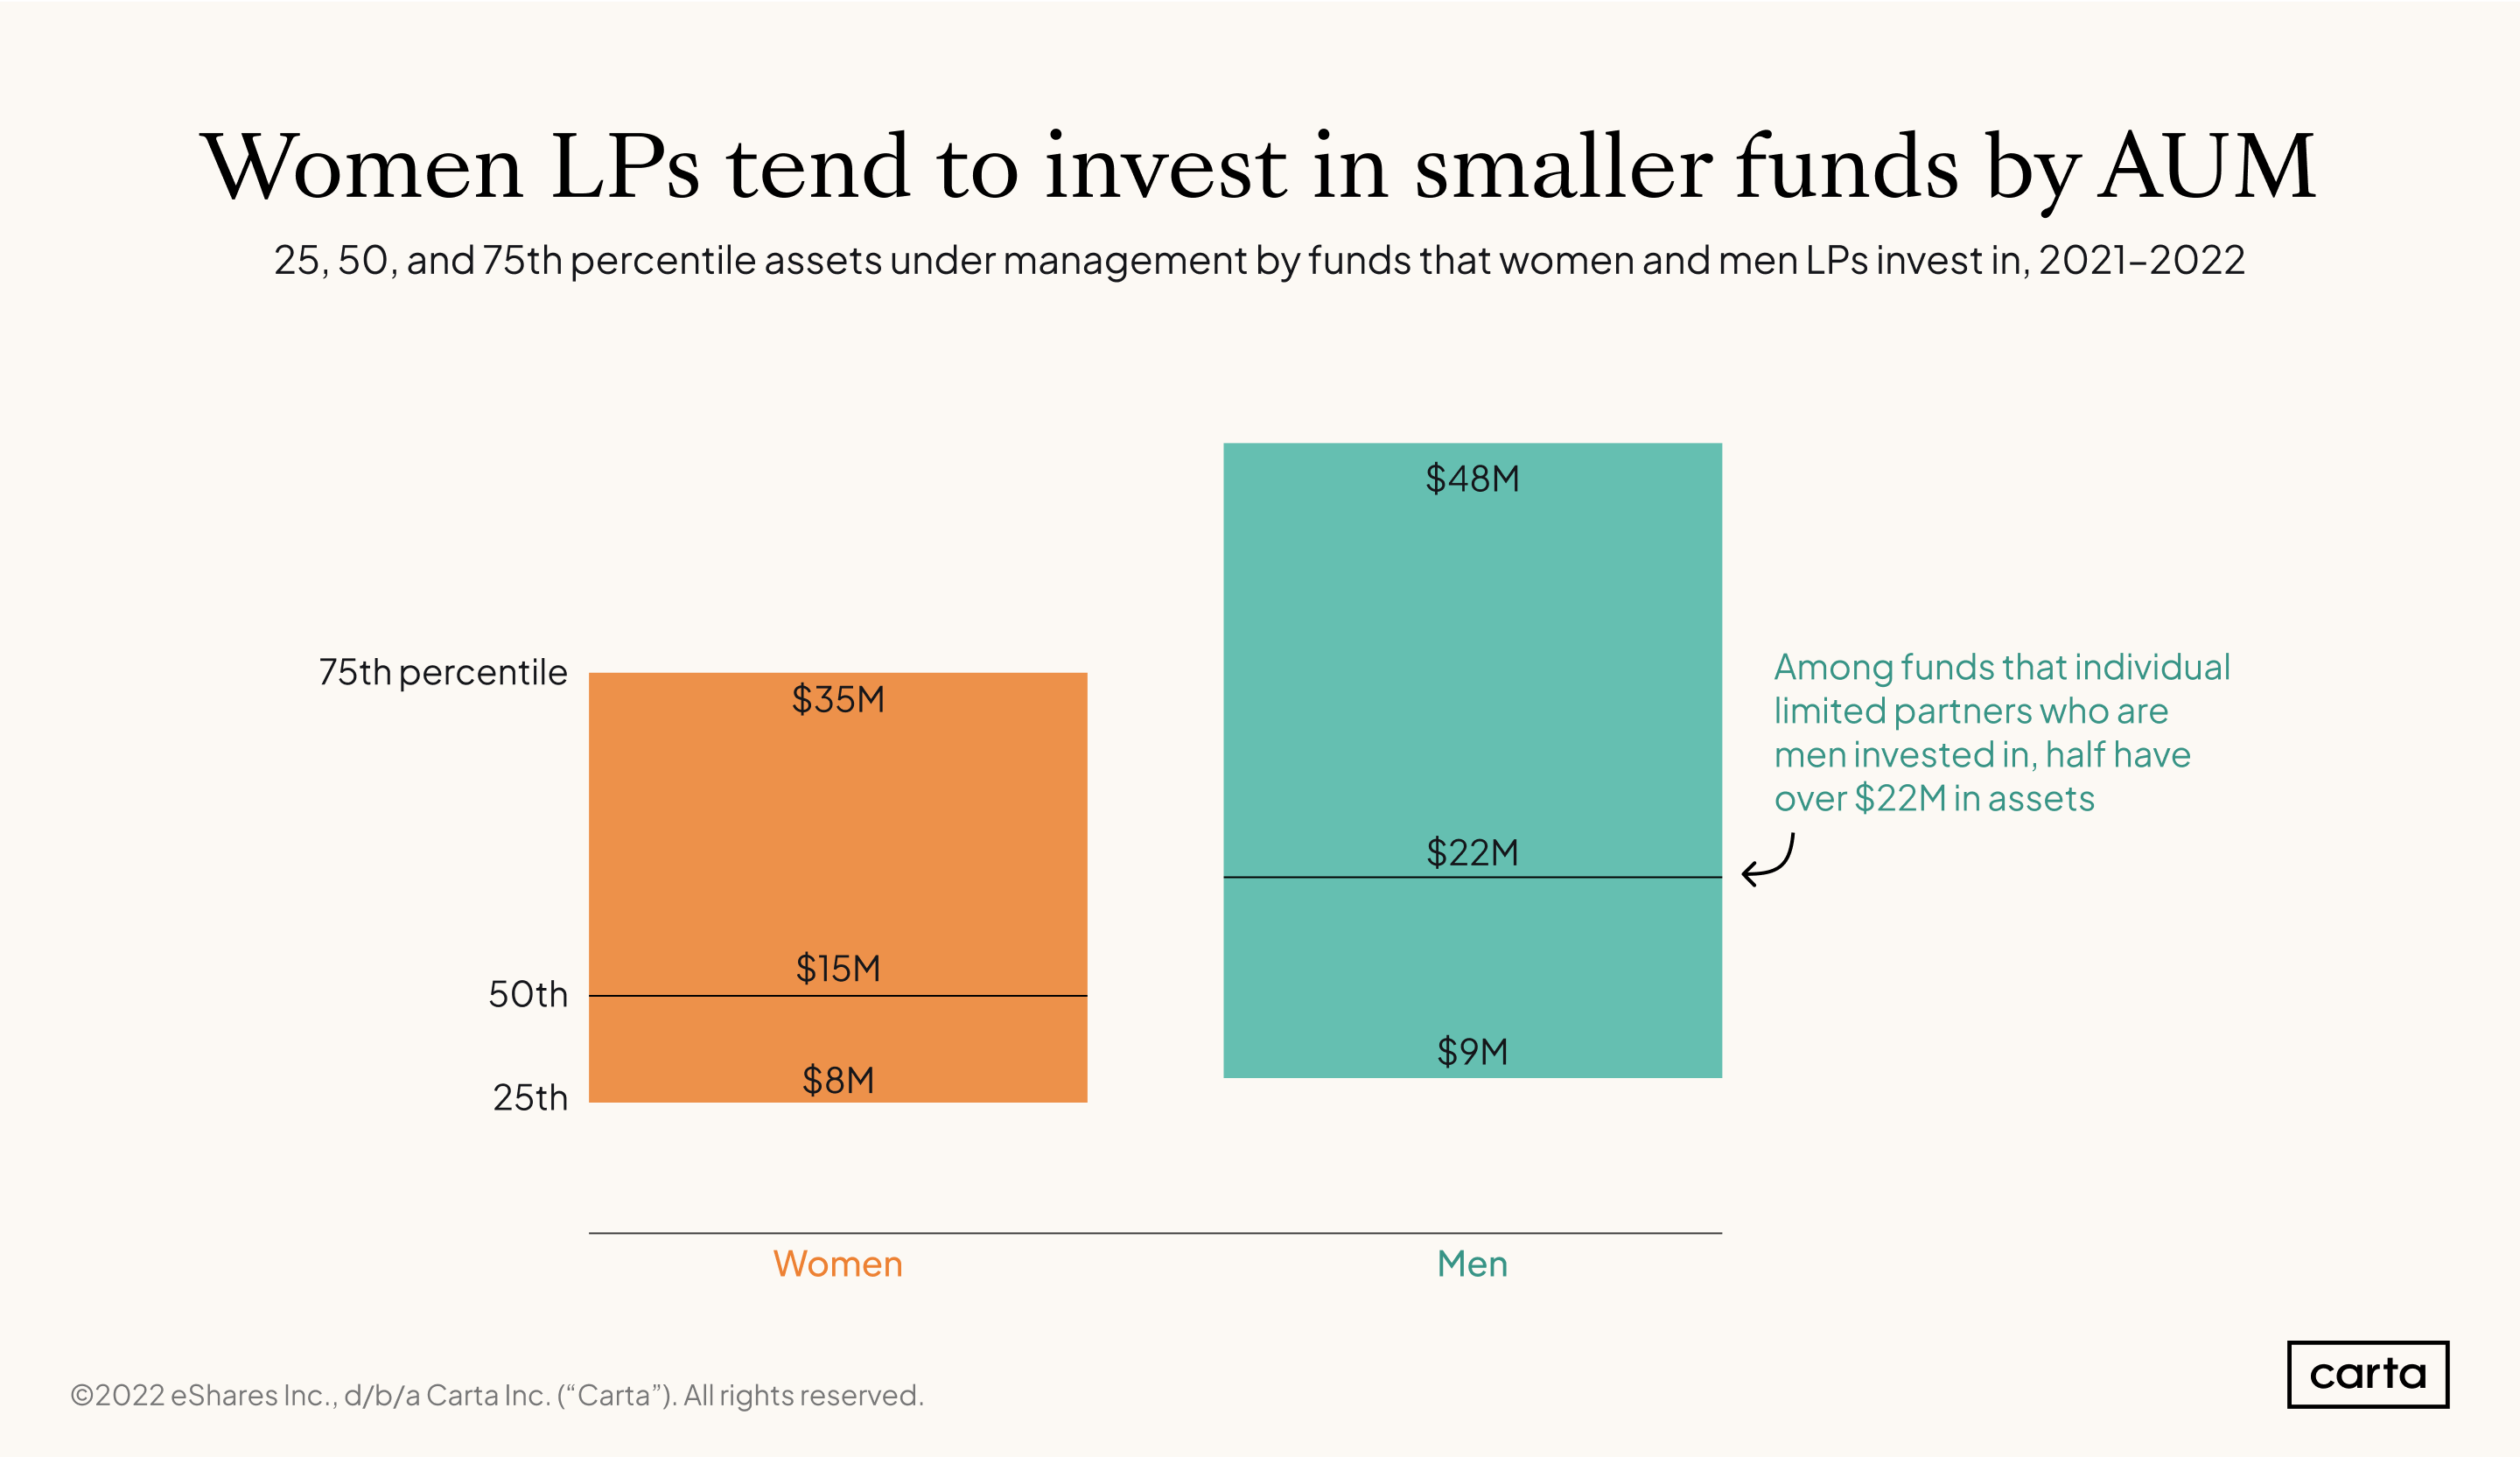 CES Size of funds by LP gender